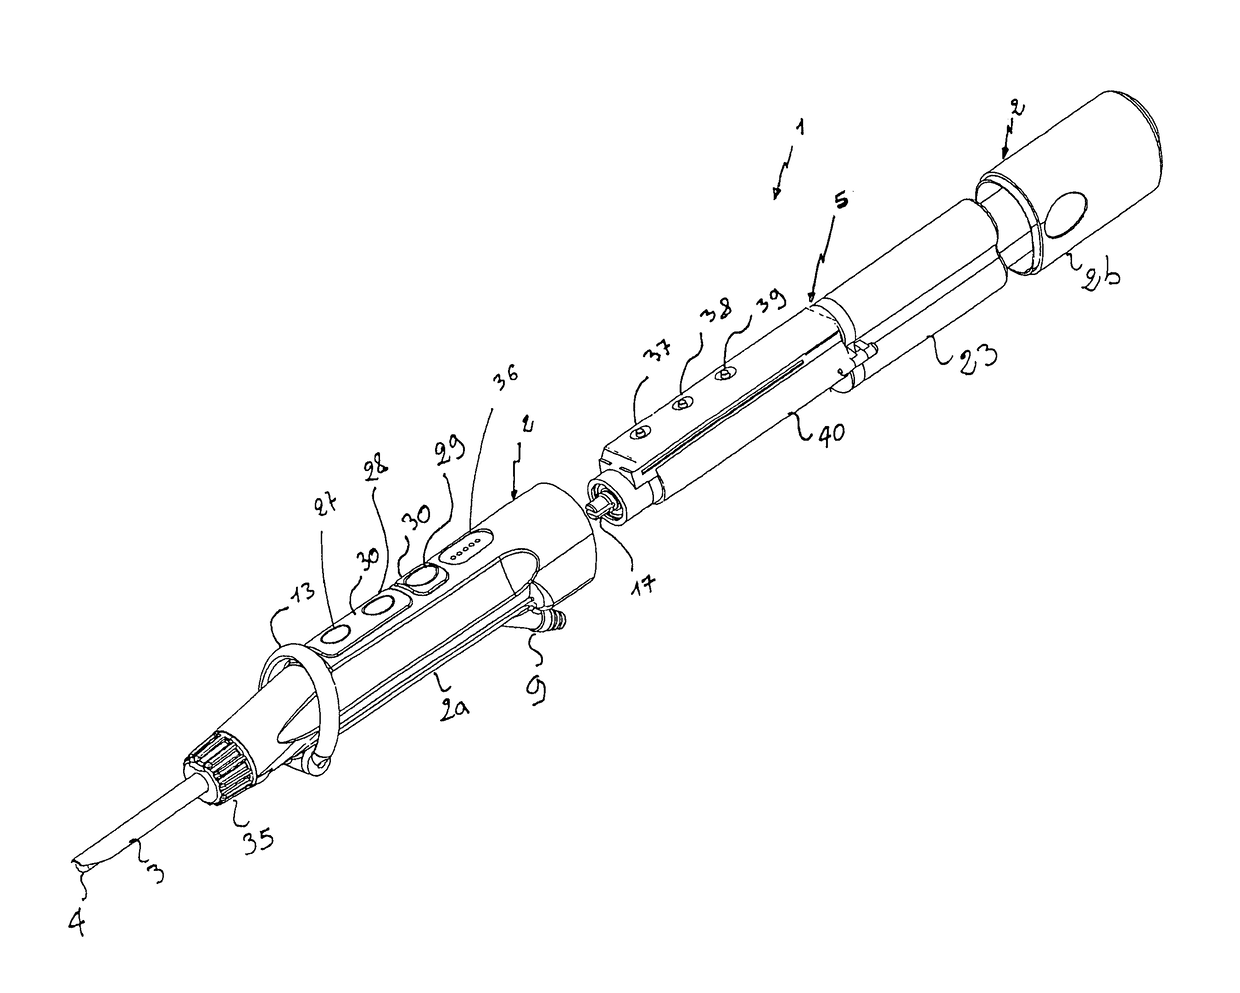 Device for endoscopic resection or removal of tissue